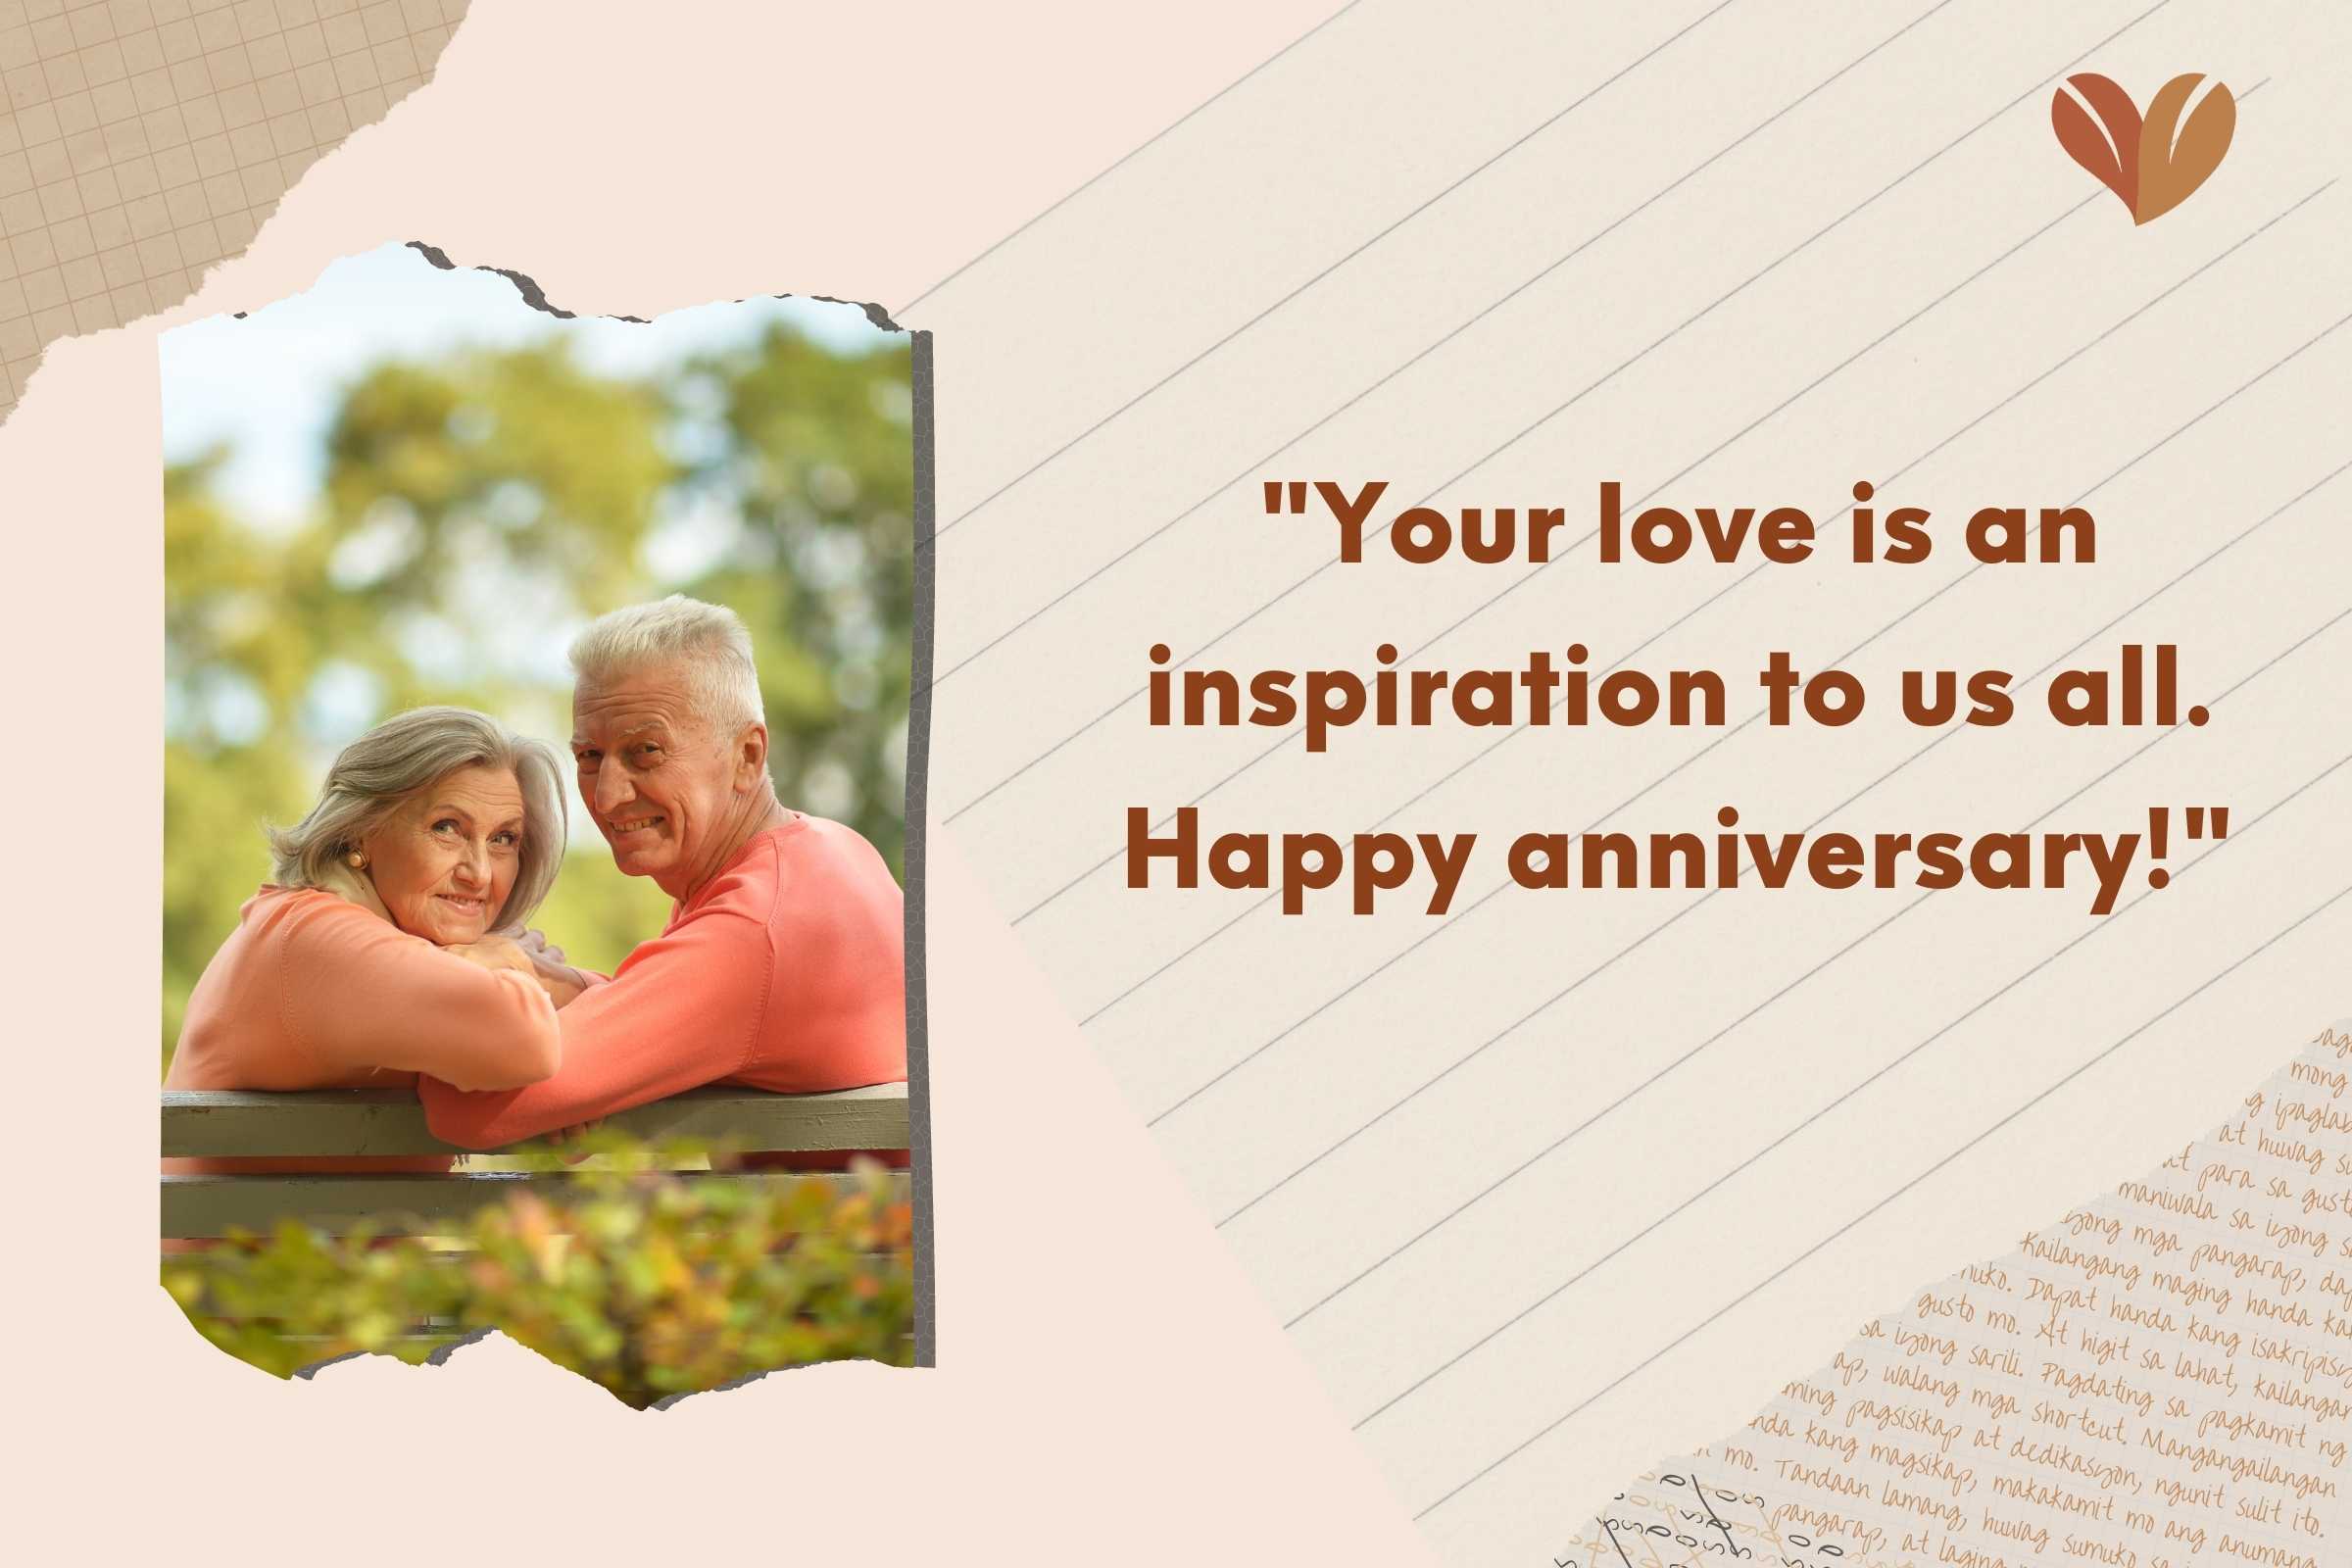 Cherishing the bond with meaningful Anniversary card messages.